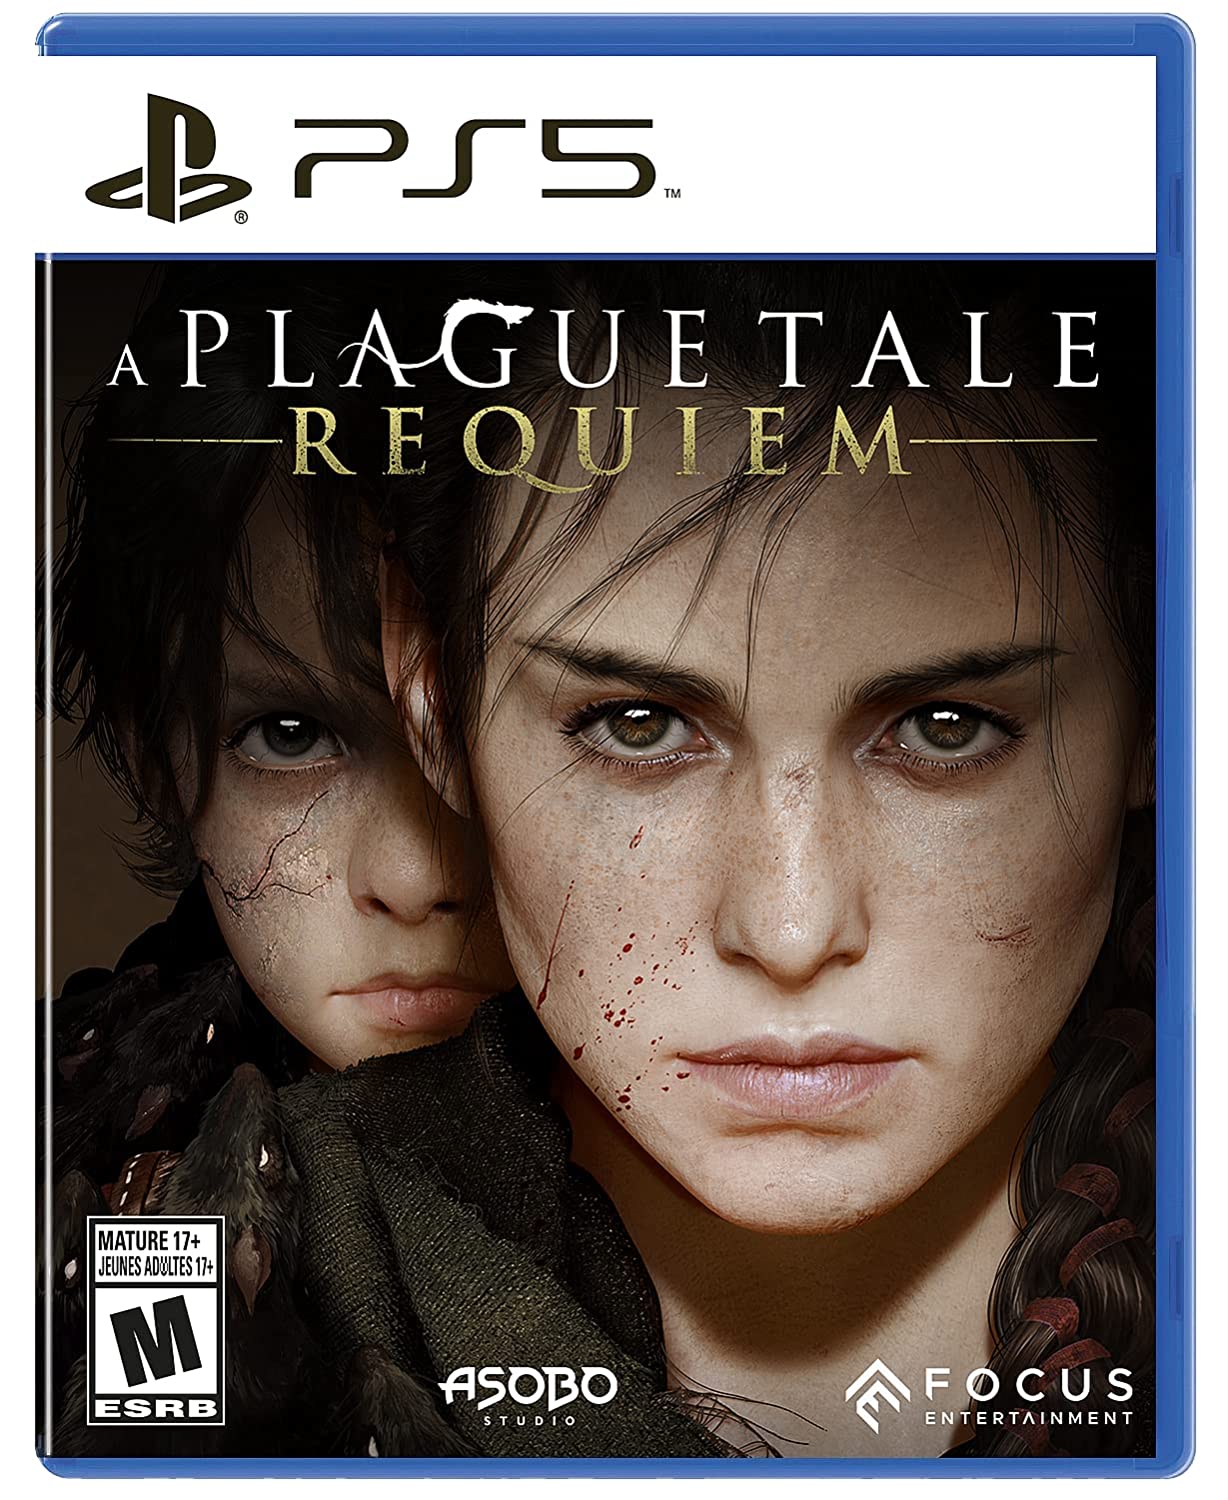 A Plague Tale: Requiem on PS5 — price history, screenshots